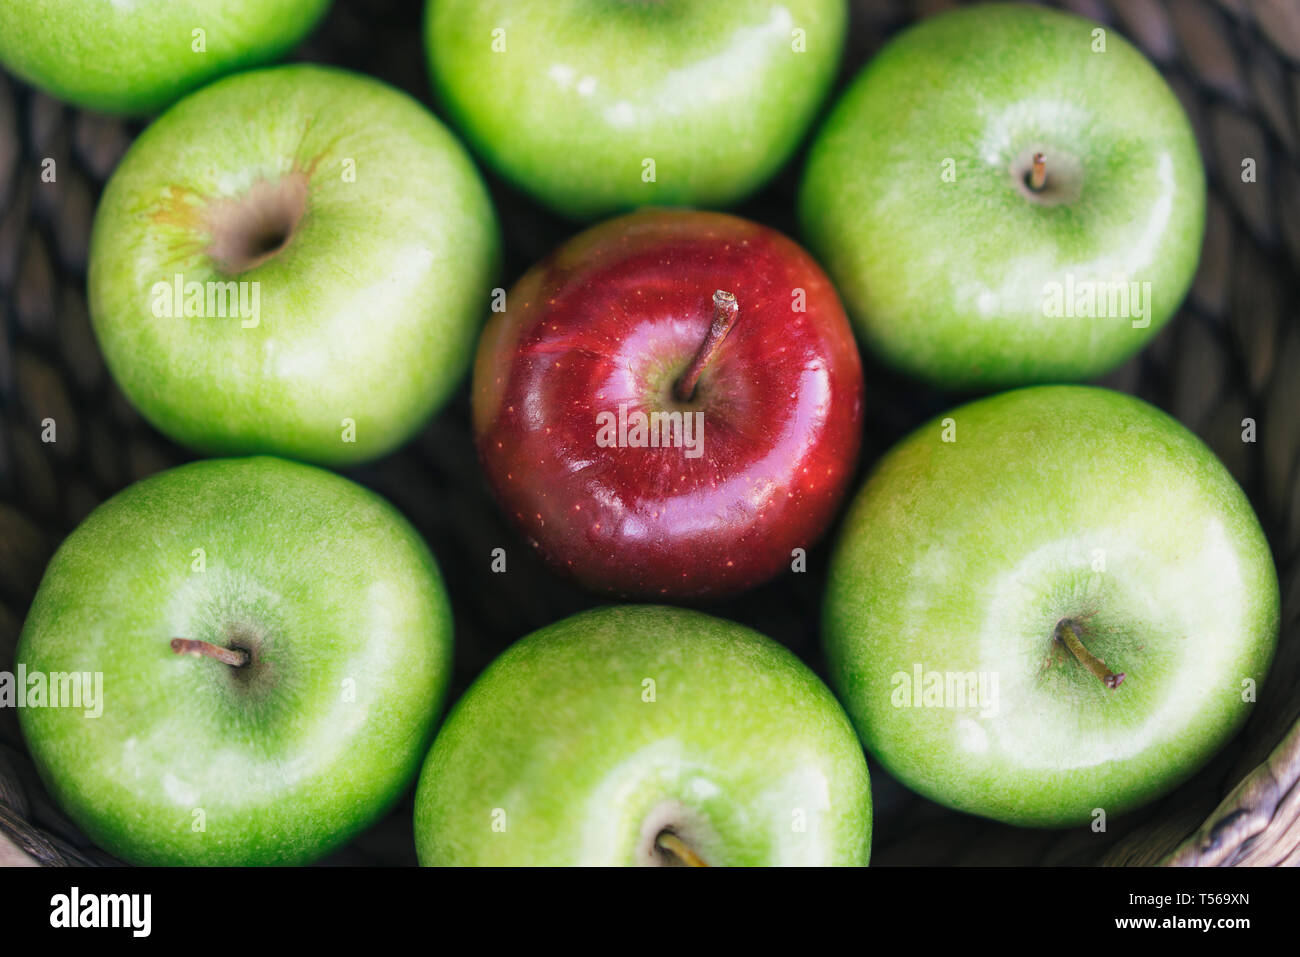 https://c8.alamy.com/comp/T569XN/closeup-view-of-a-healthy-colorful-green-apples-and-one-red-apple-in-a-basket-and-the-tasty-benefits-of-each-be-different-T569XN.jpg